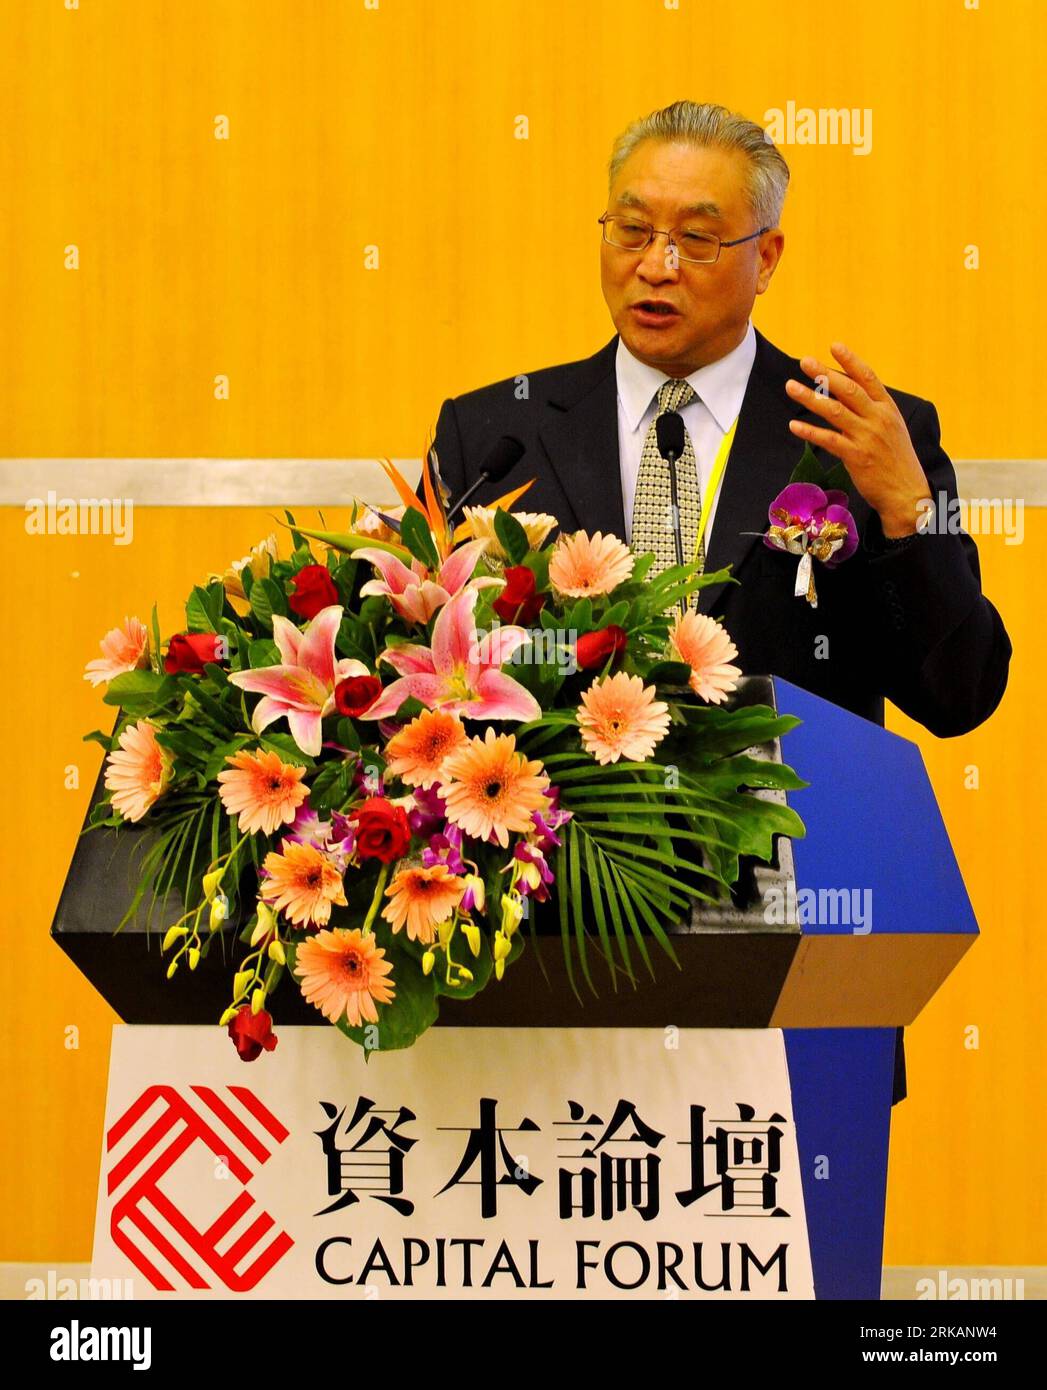 Bildnummer: 54410896  Datum: 08.09.2010  Copyright: imago/Xinhua (100908) -- XIAMEN, Sept. 8, 2010 (Xinhua) -- Zhang Mingqing, deputy chief of the mainland s Association for Relations Across the Taiwan Straits, addresses during the opening ceremony of the forum in Xiamen, southeast China s Fujian Province, Sept. 8, 2010. The 2010 Capital Forum, one of the activities of CIFIT (China International Fair for Investment & Trade), kicked off here Wednesday, with the theme of Focus on China Enjoy Capital Growth . (Xinhua/Wei Peiquan) (wyo) CHINA-XIAMEN-CAPITAL FORUM (CN) PUBLICATIONxNOTxINxCHN People Stock Photo